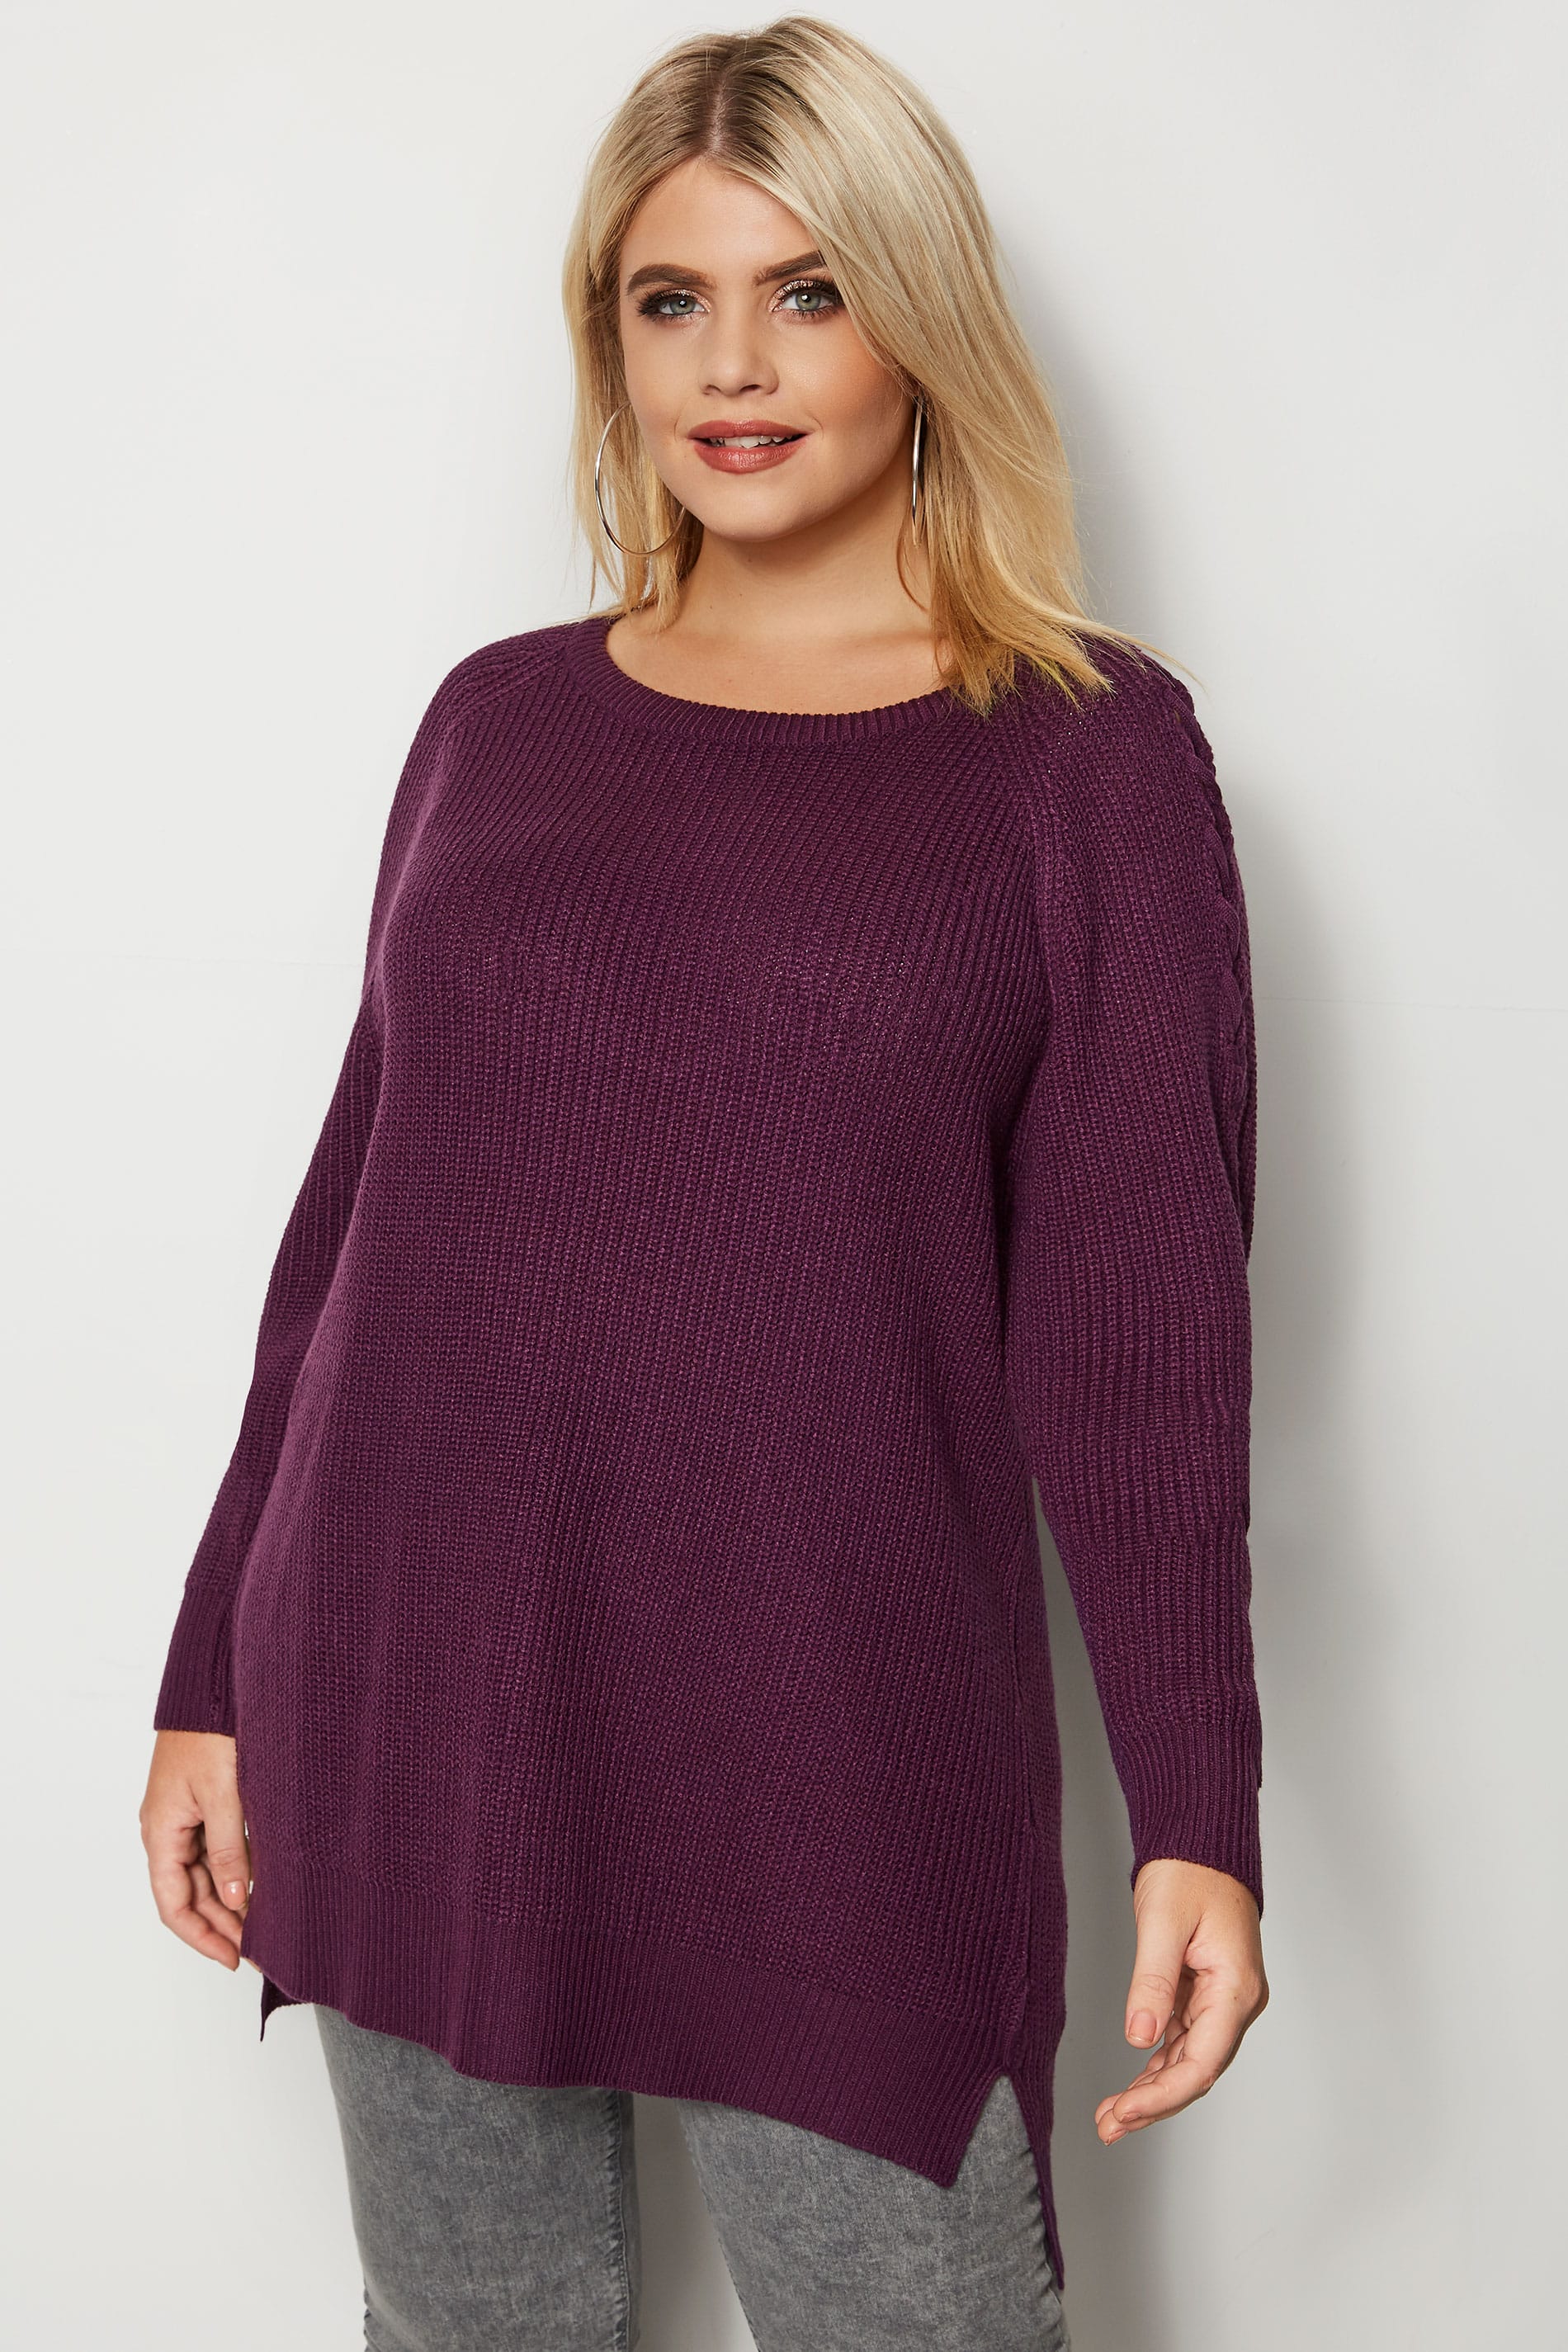 Purple Knitted Jumper With Lattice Shoulders, plus size 16 to 36